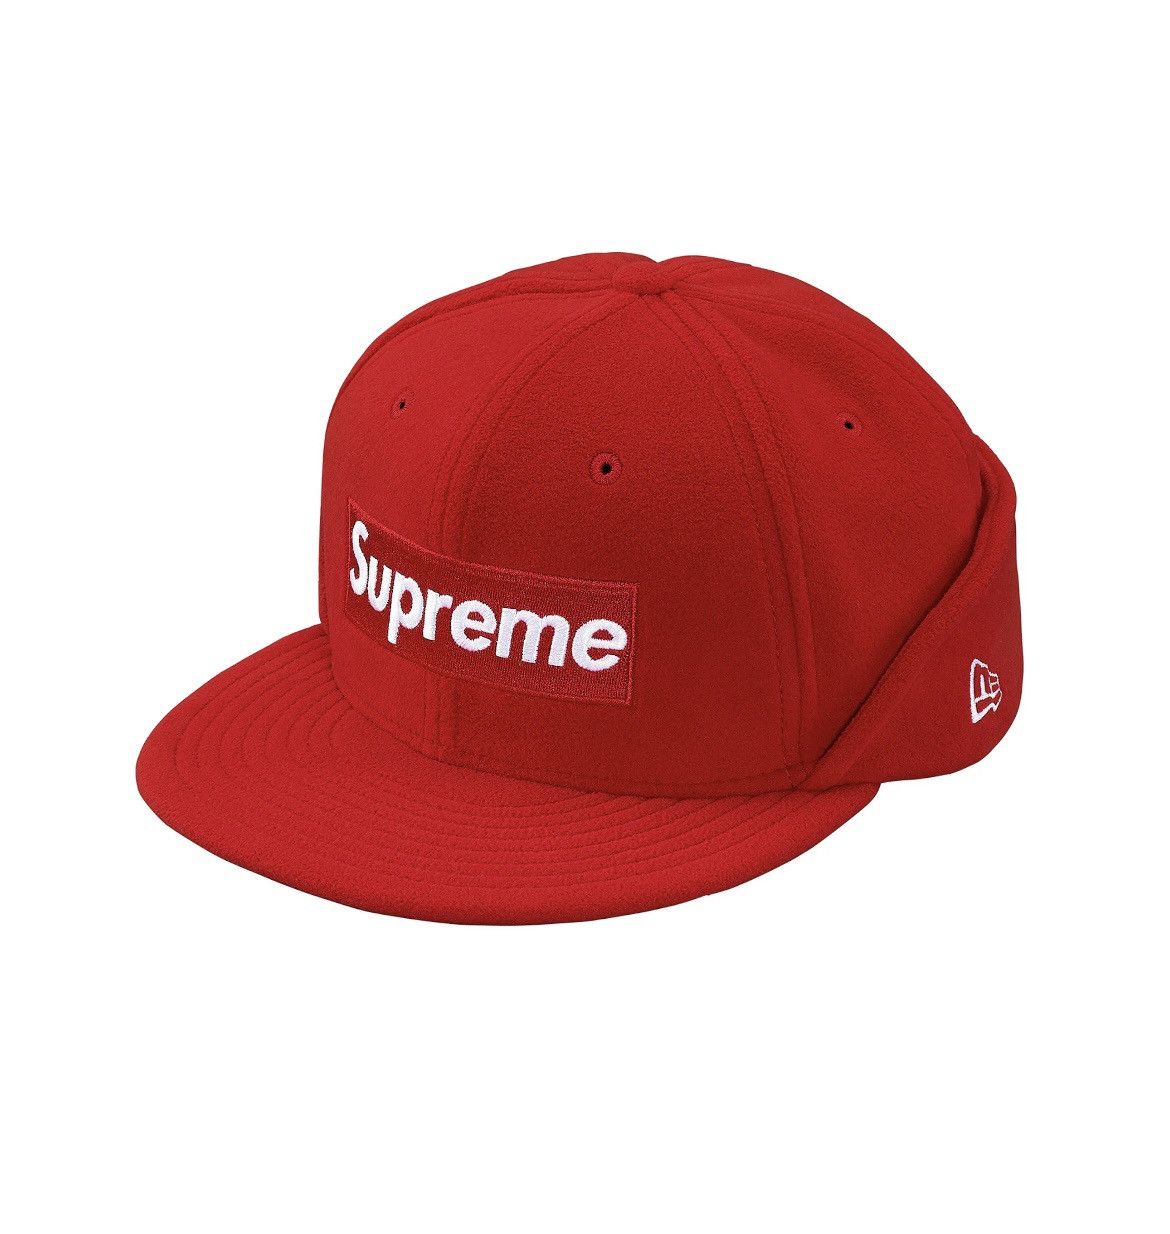 Supreme Reflective Loose Gauge Beanie!!FW17!! RED COLOR